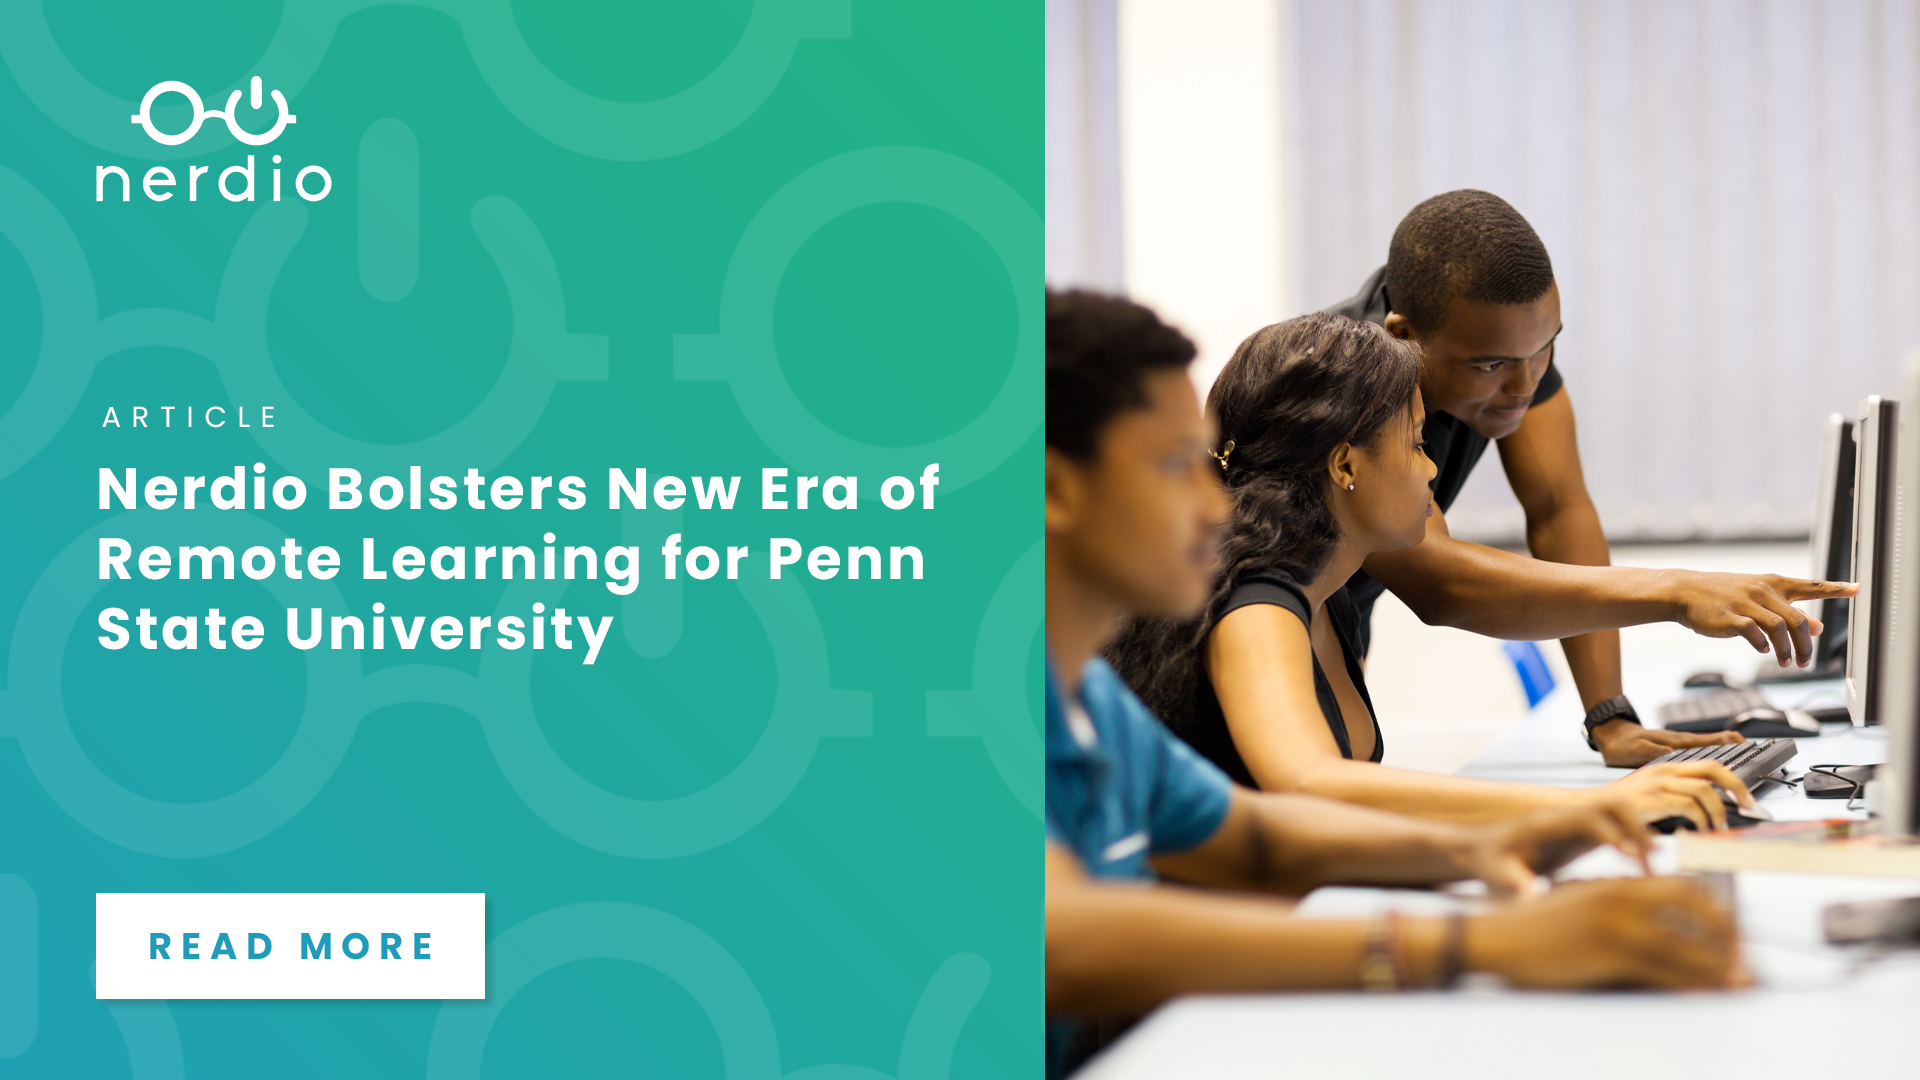 Penn State University Case Study Featured Image